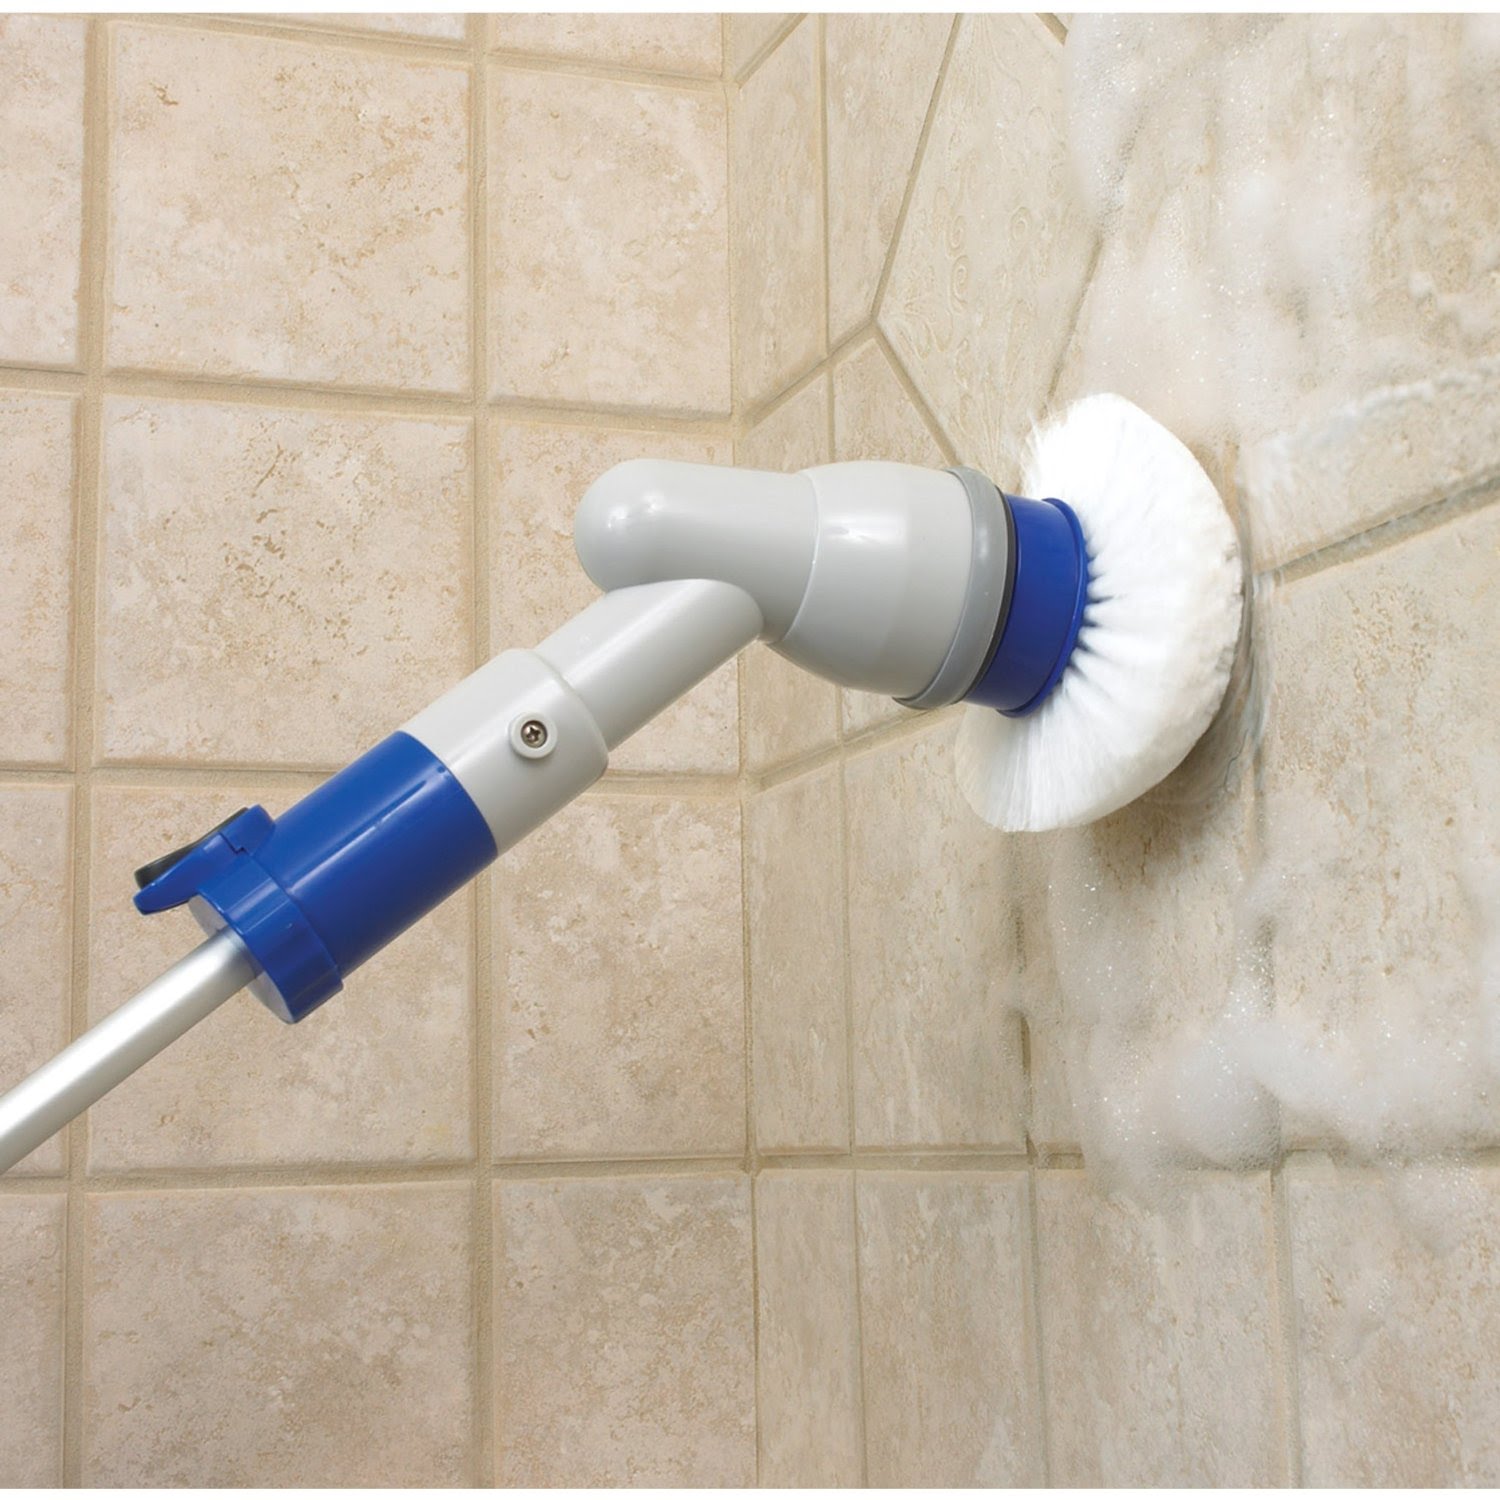 How to clean bathroom tiles: methods and tips - Ideas by Mr Right